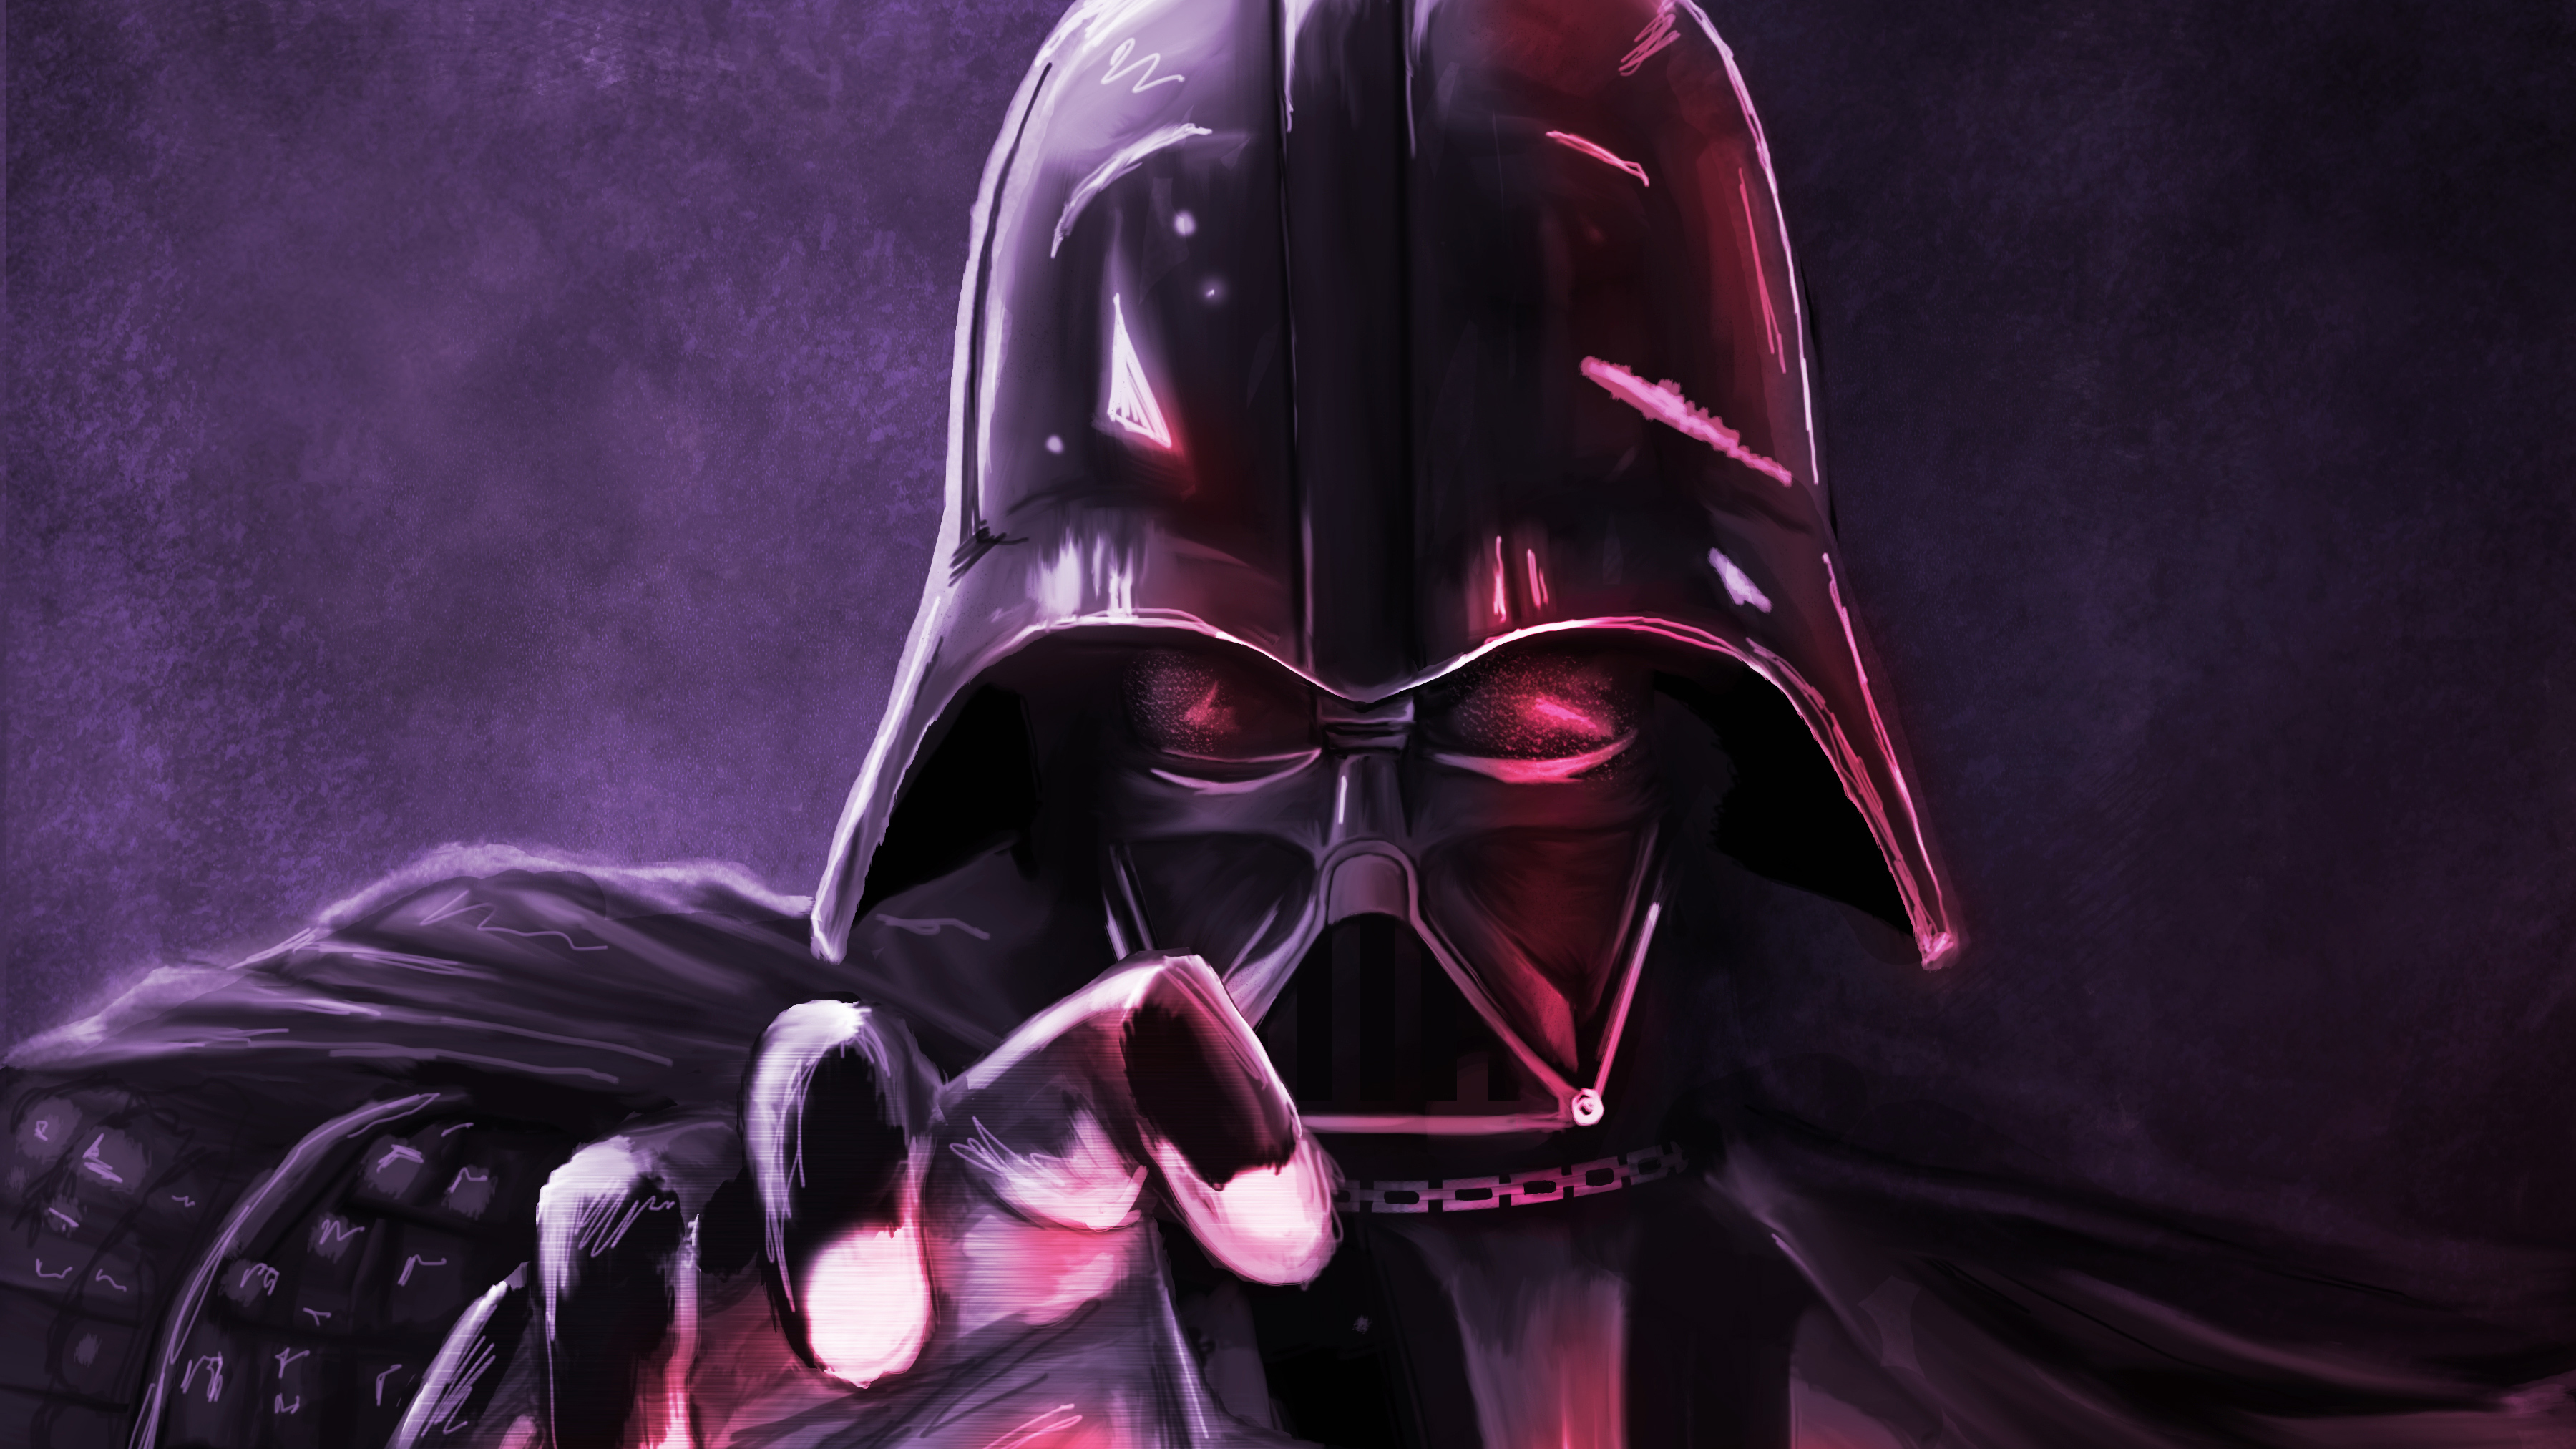 Darth Vader Art 4k Hd Movies 4k Wallpapers Images Backgrounds Photos And Pictures